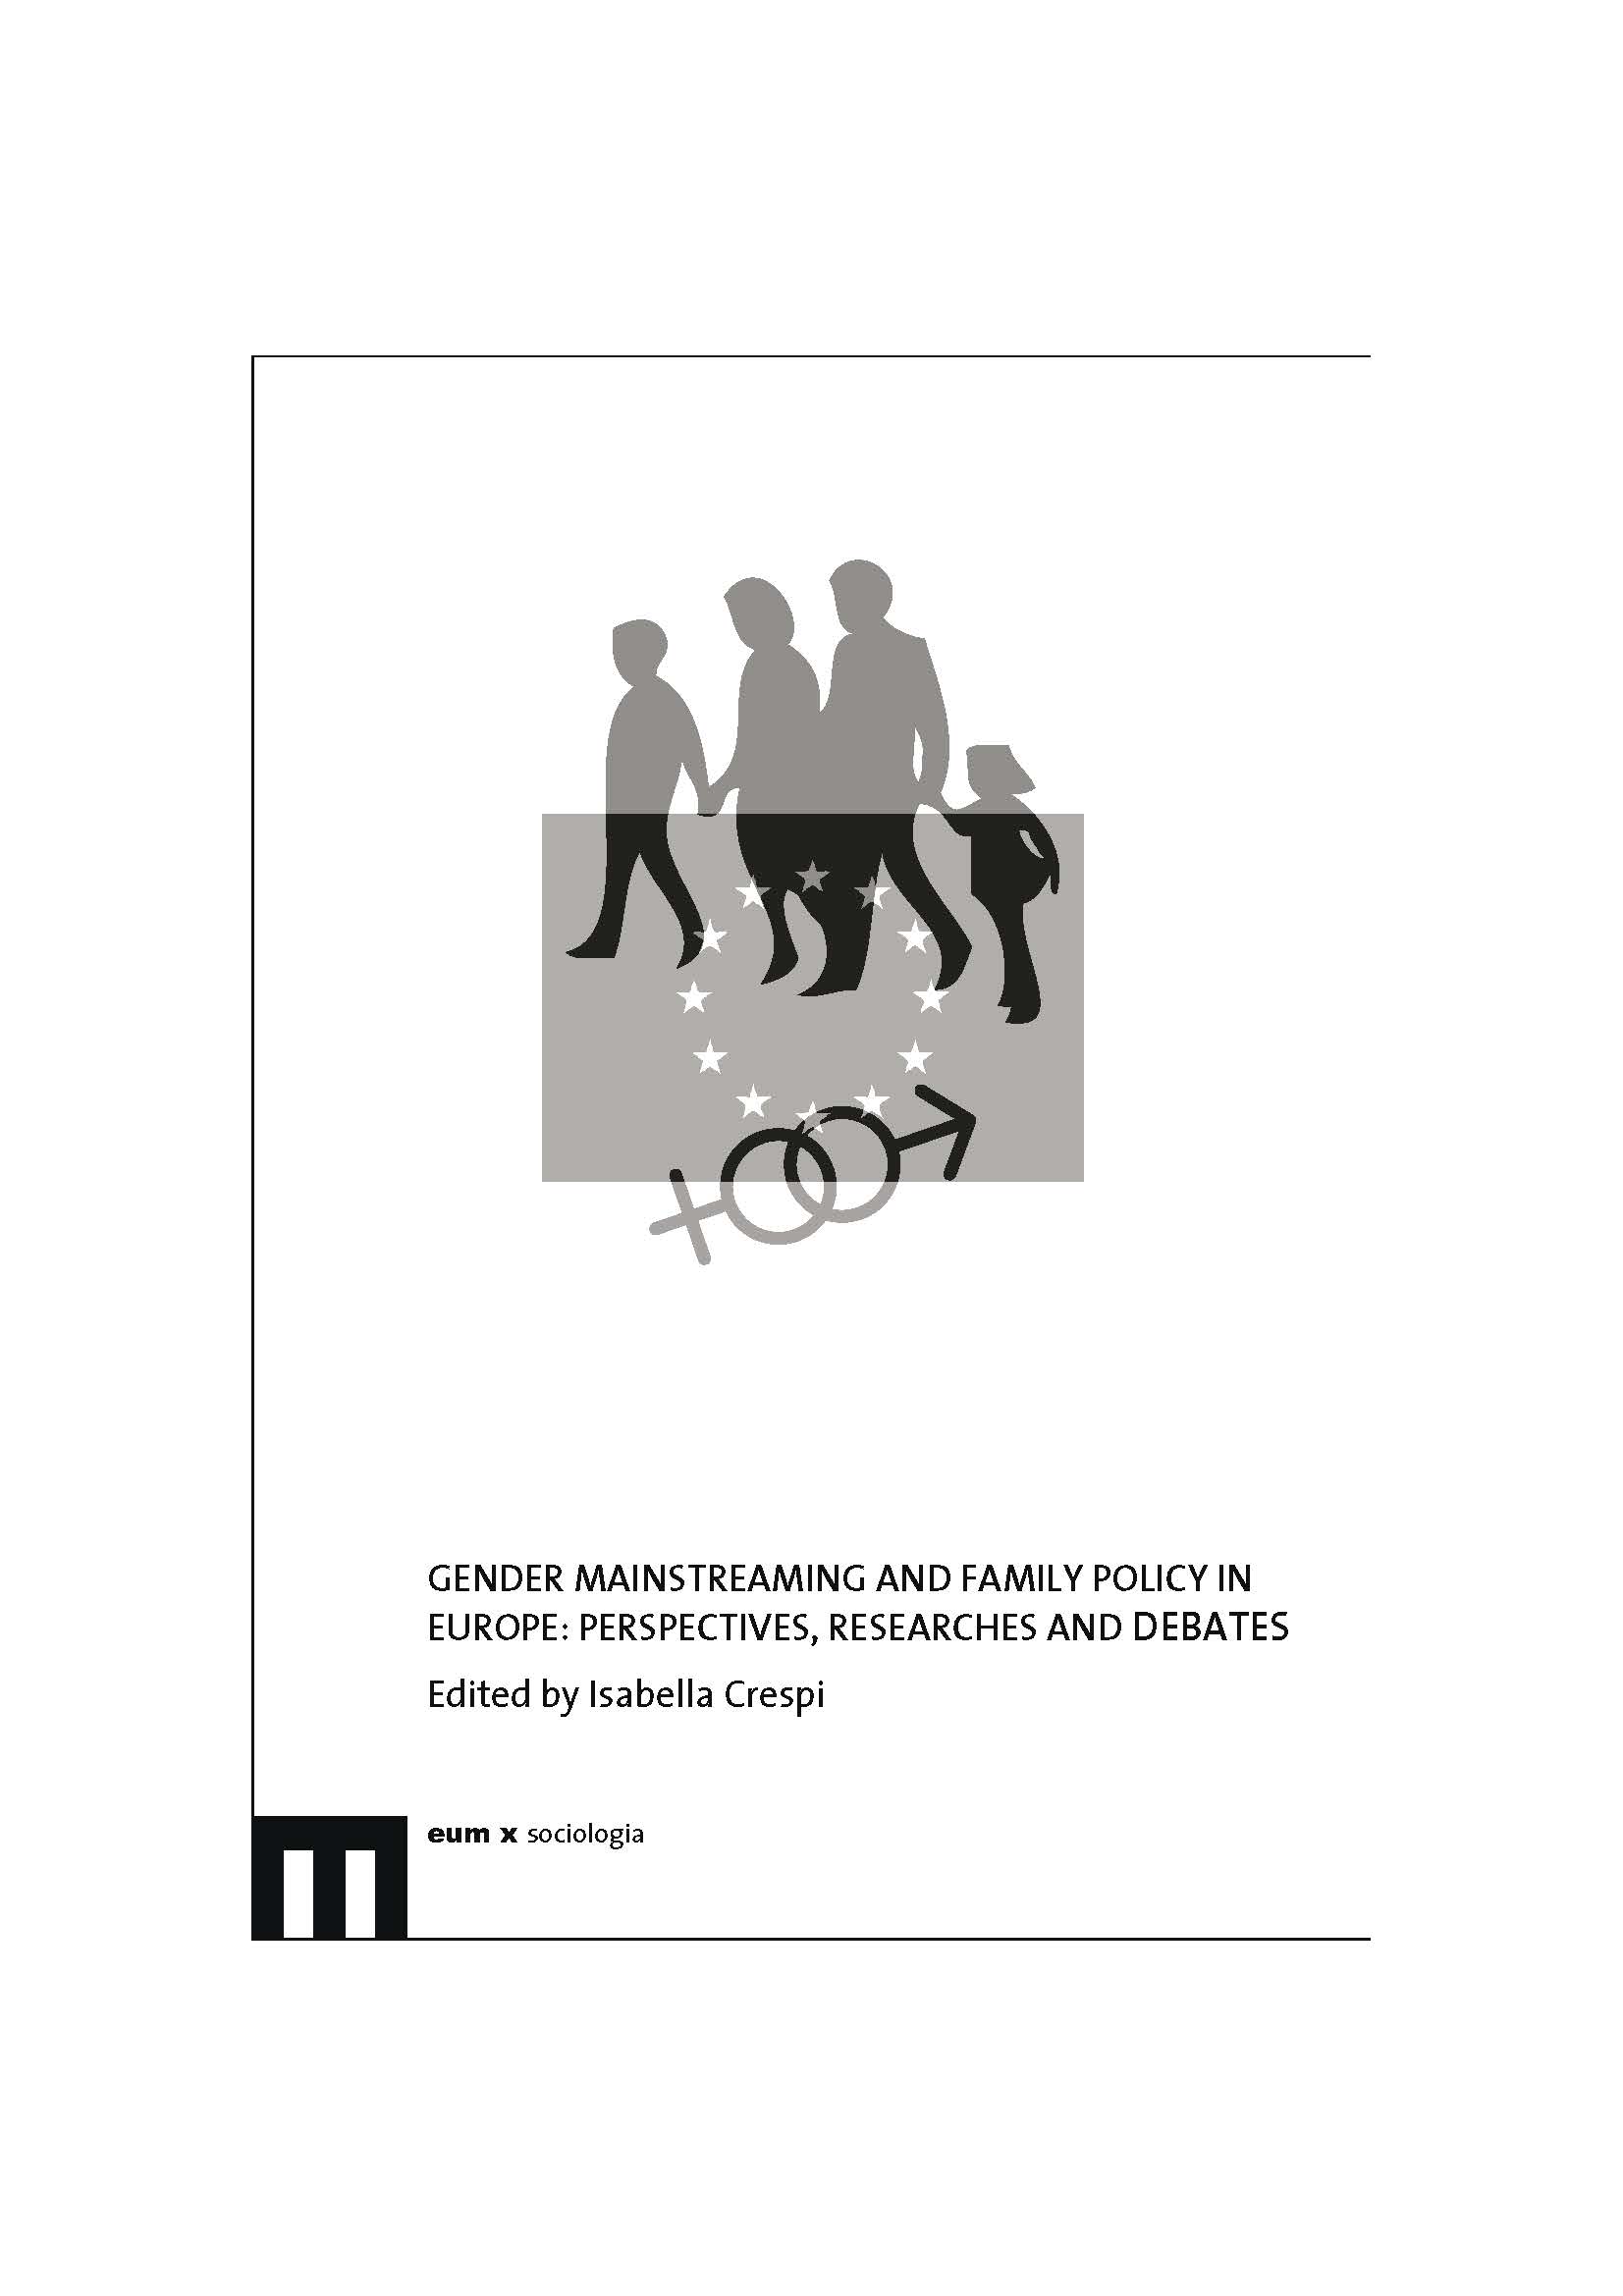 Gender mainstreaming and family policy in Europe: Perspectives, Researches and Debates